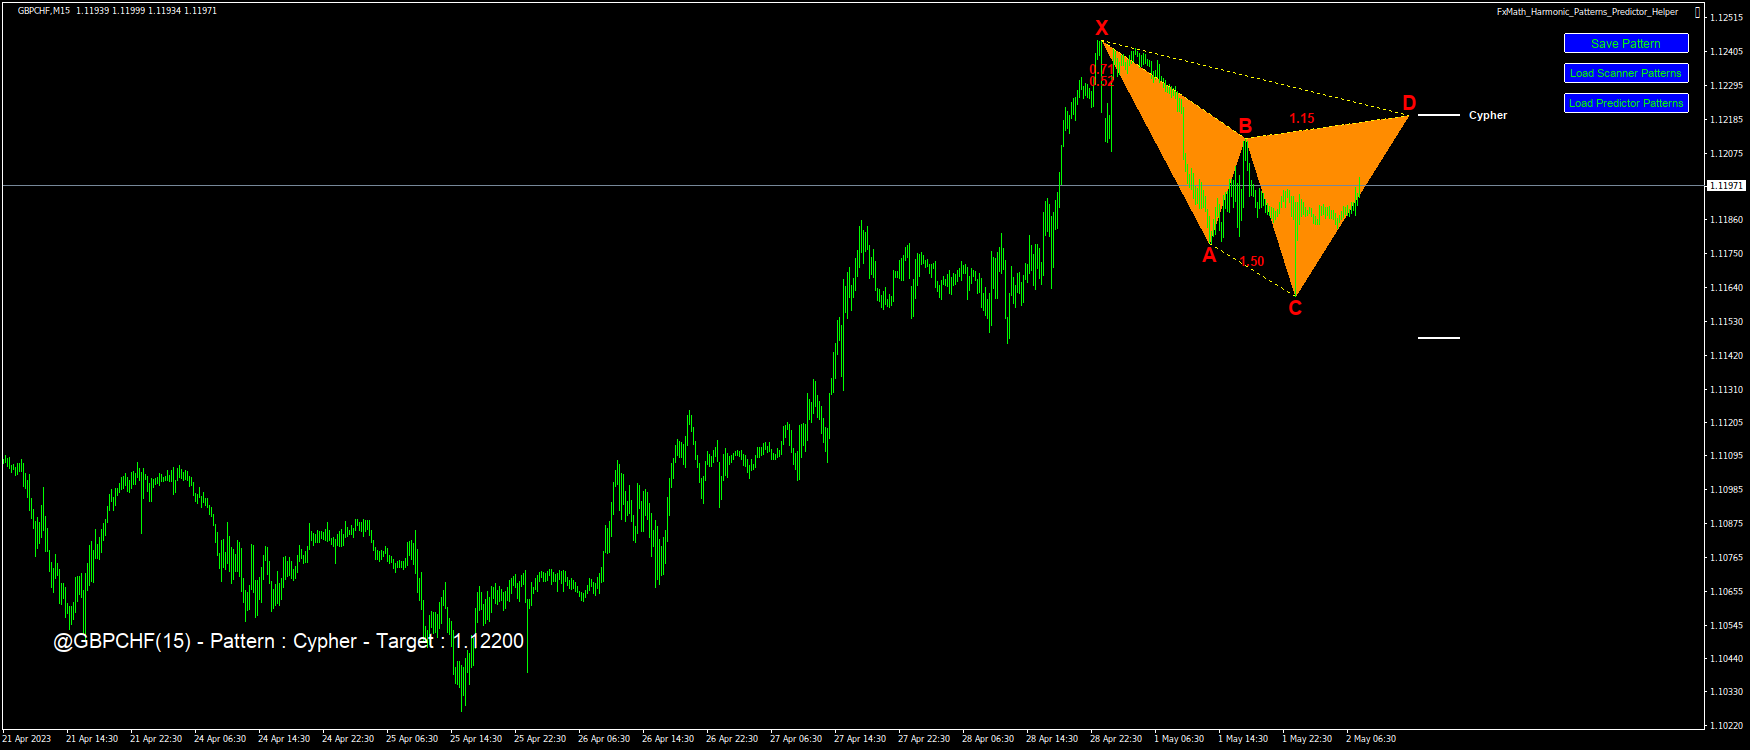 @GBPCHF(15) – Pattern : Cypher – Target : 1.12200-2023.05.02 08:06